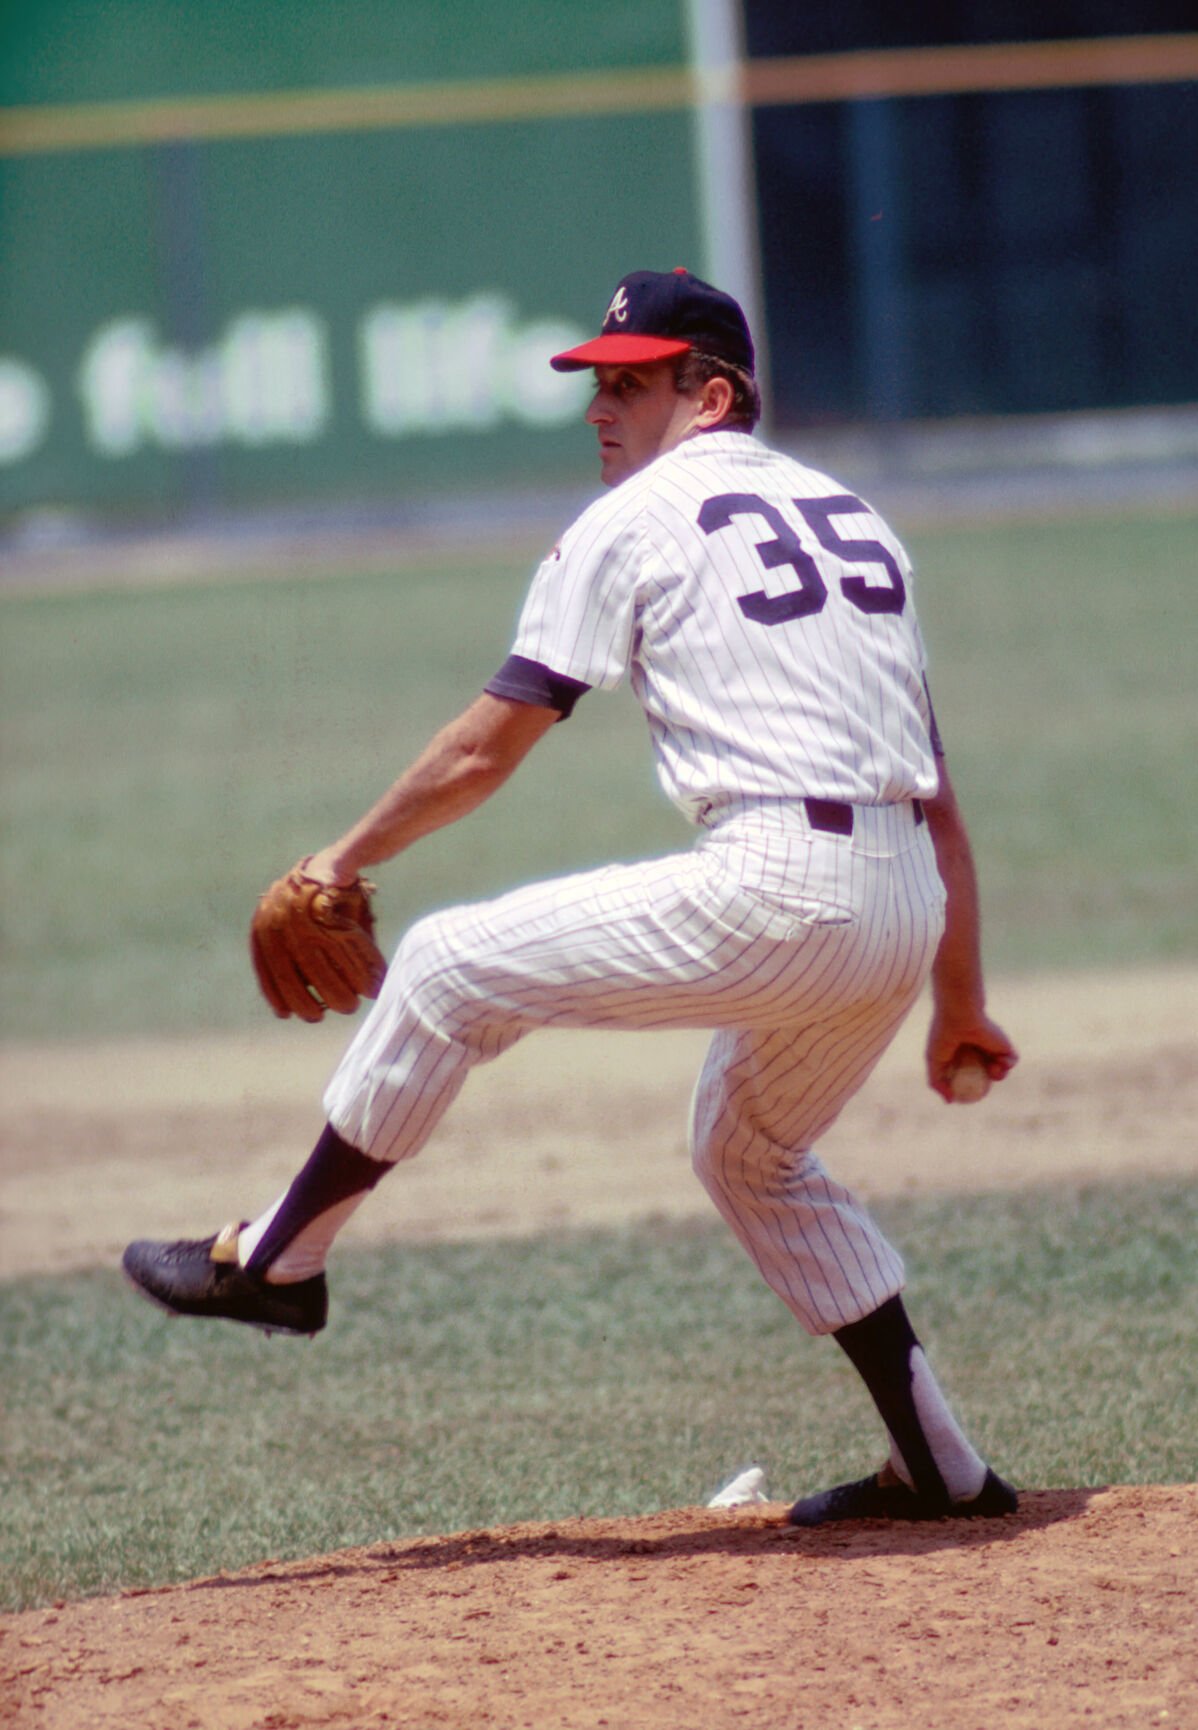 Former Atlanta Braves pitcher Phil Niekro throws out a pitch while